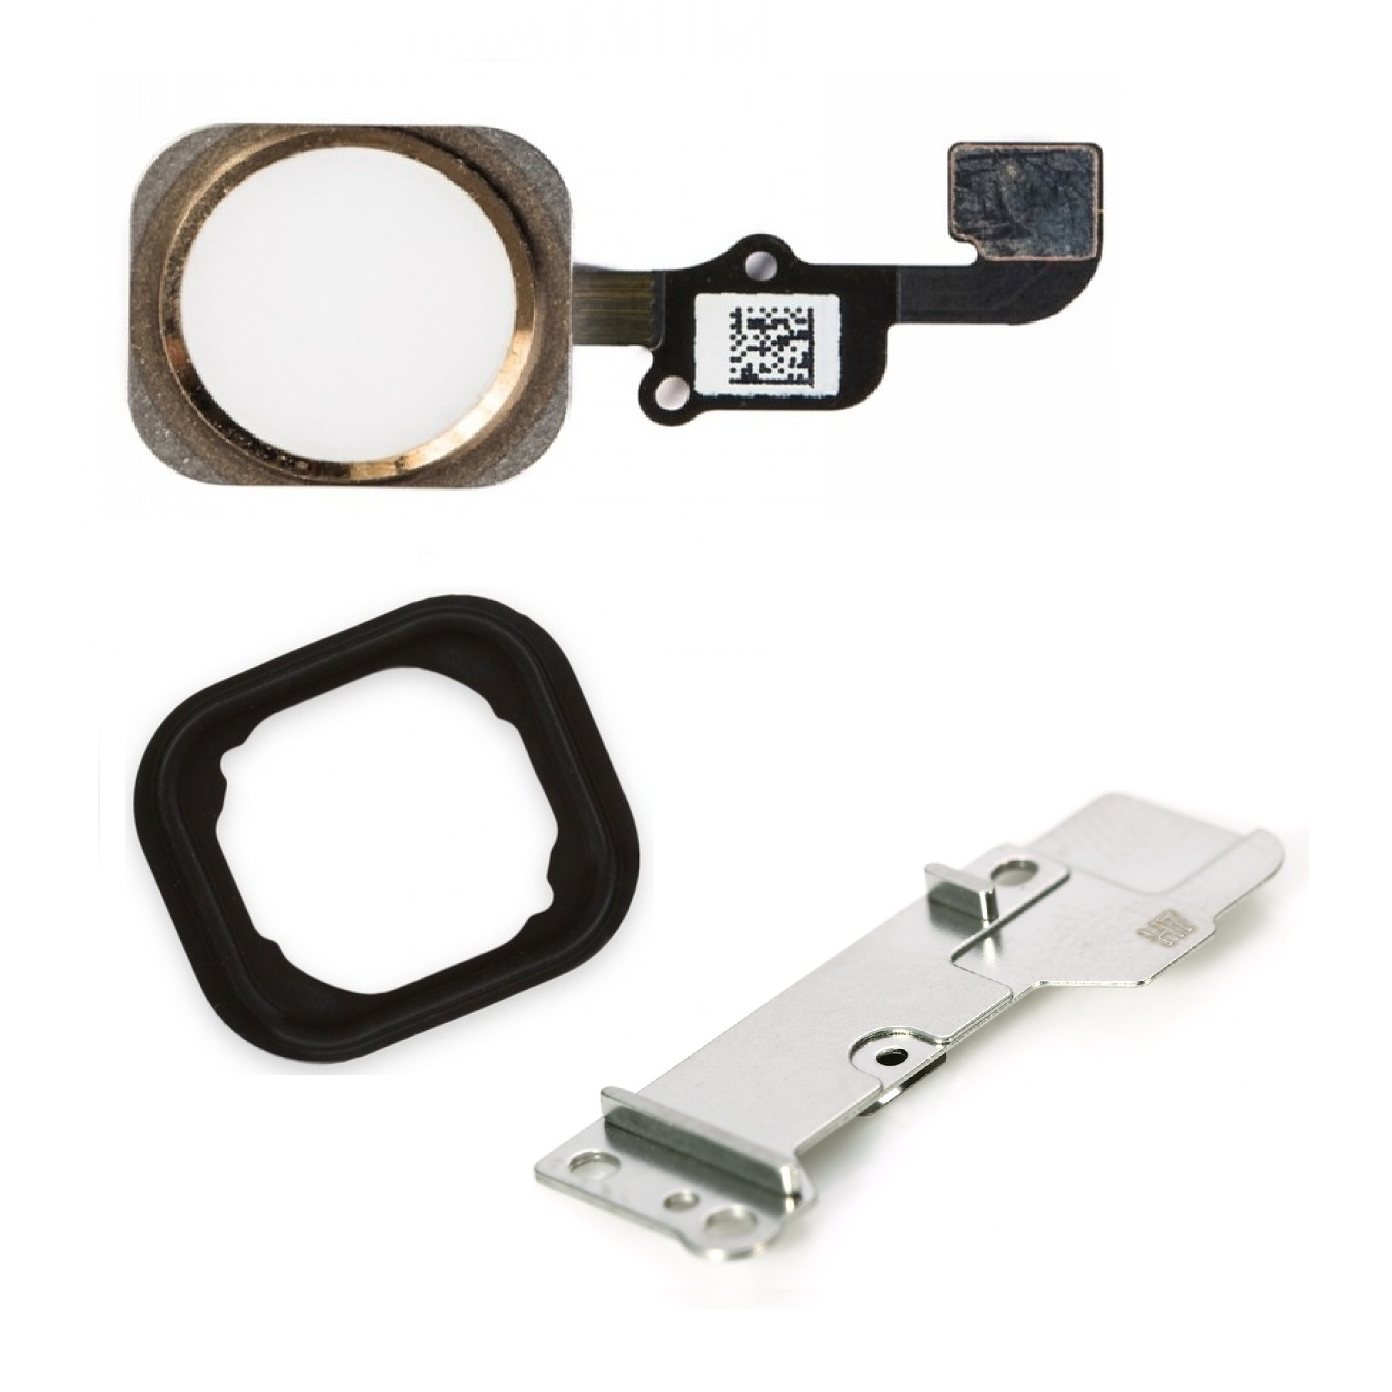 Apple iPhone 6 / 6 Plus Home Button Flex Cable+Holder Rubber+Metal Bracket - Gold for [product_price] - First Help Tech